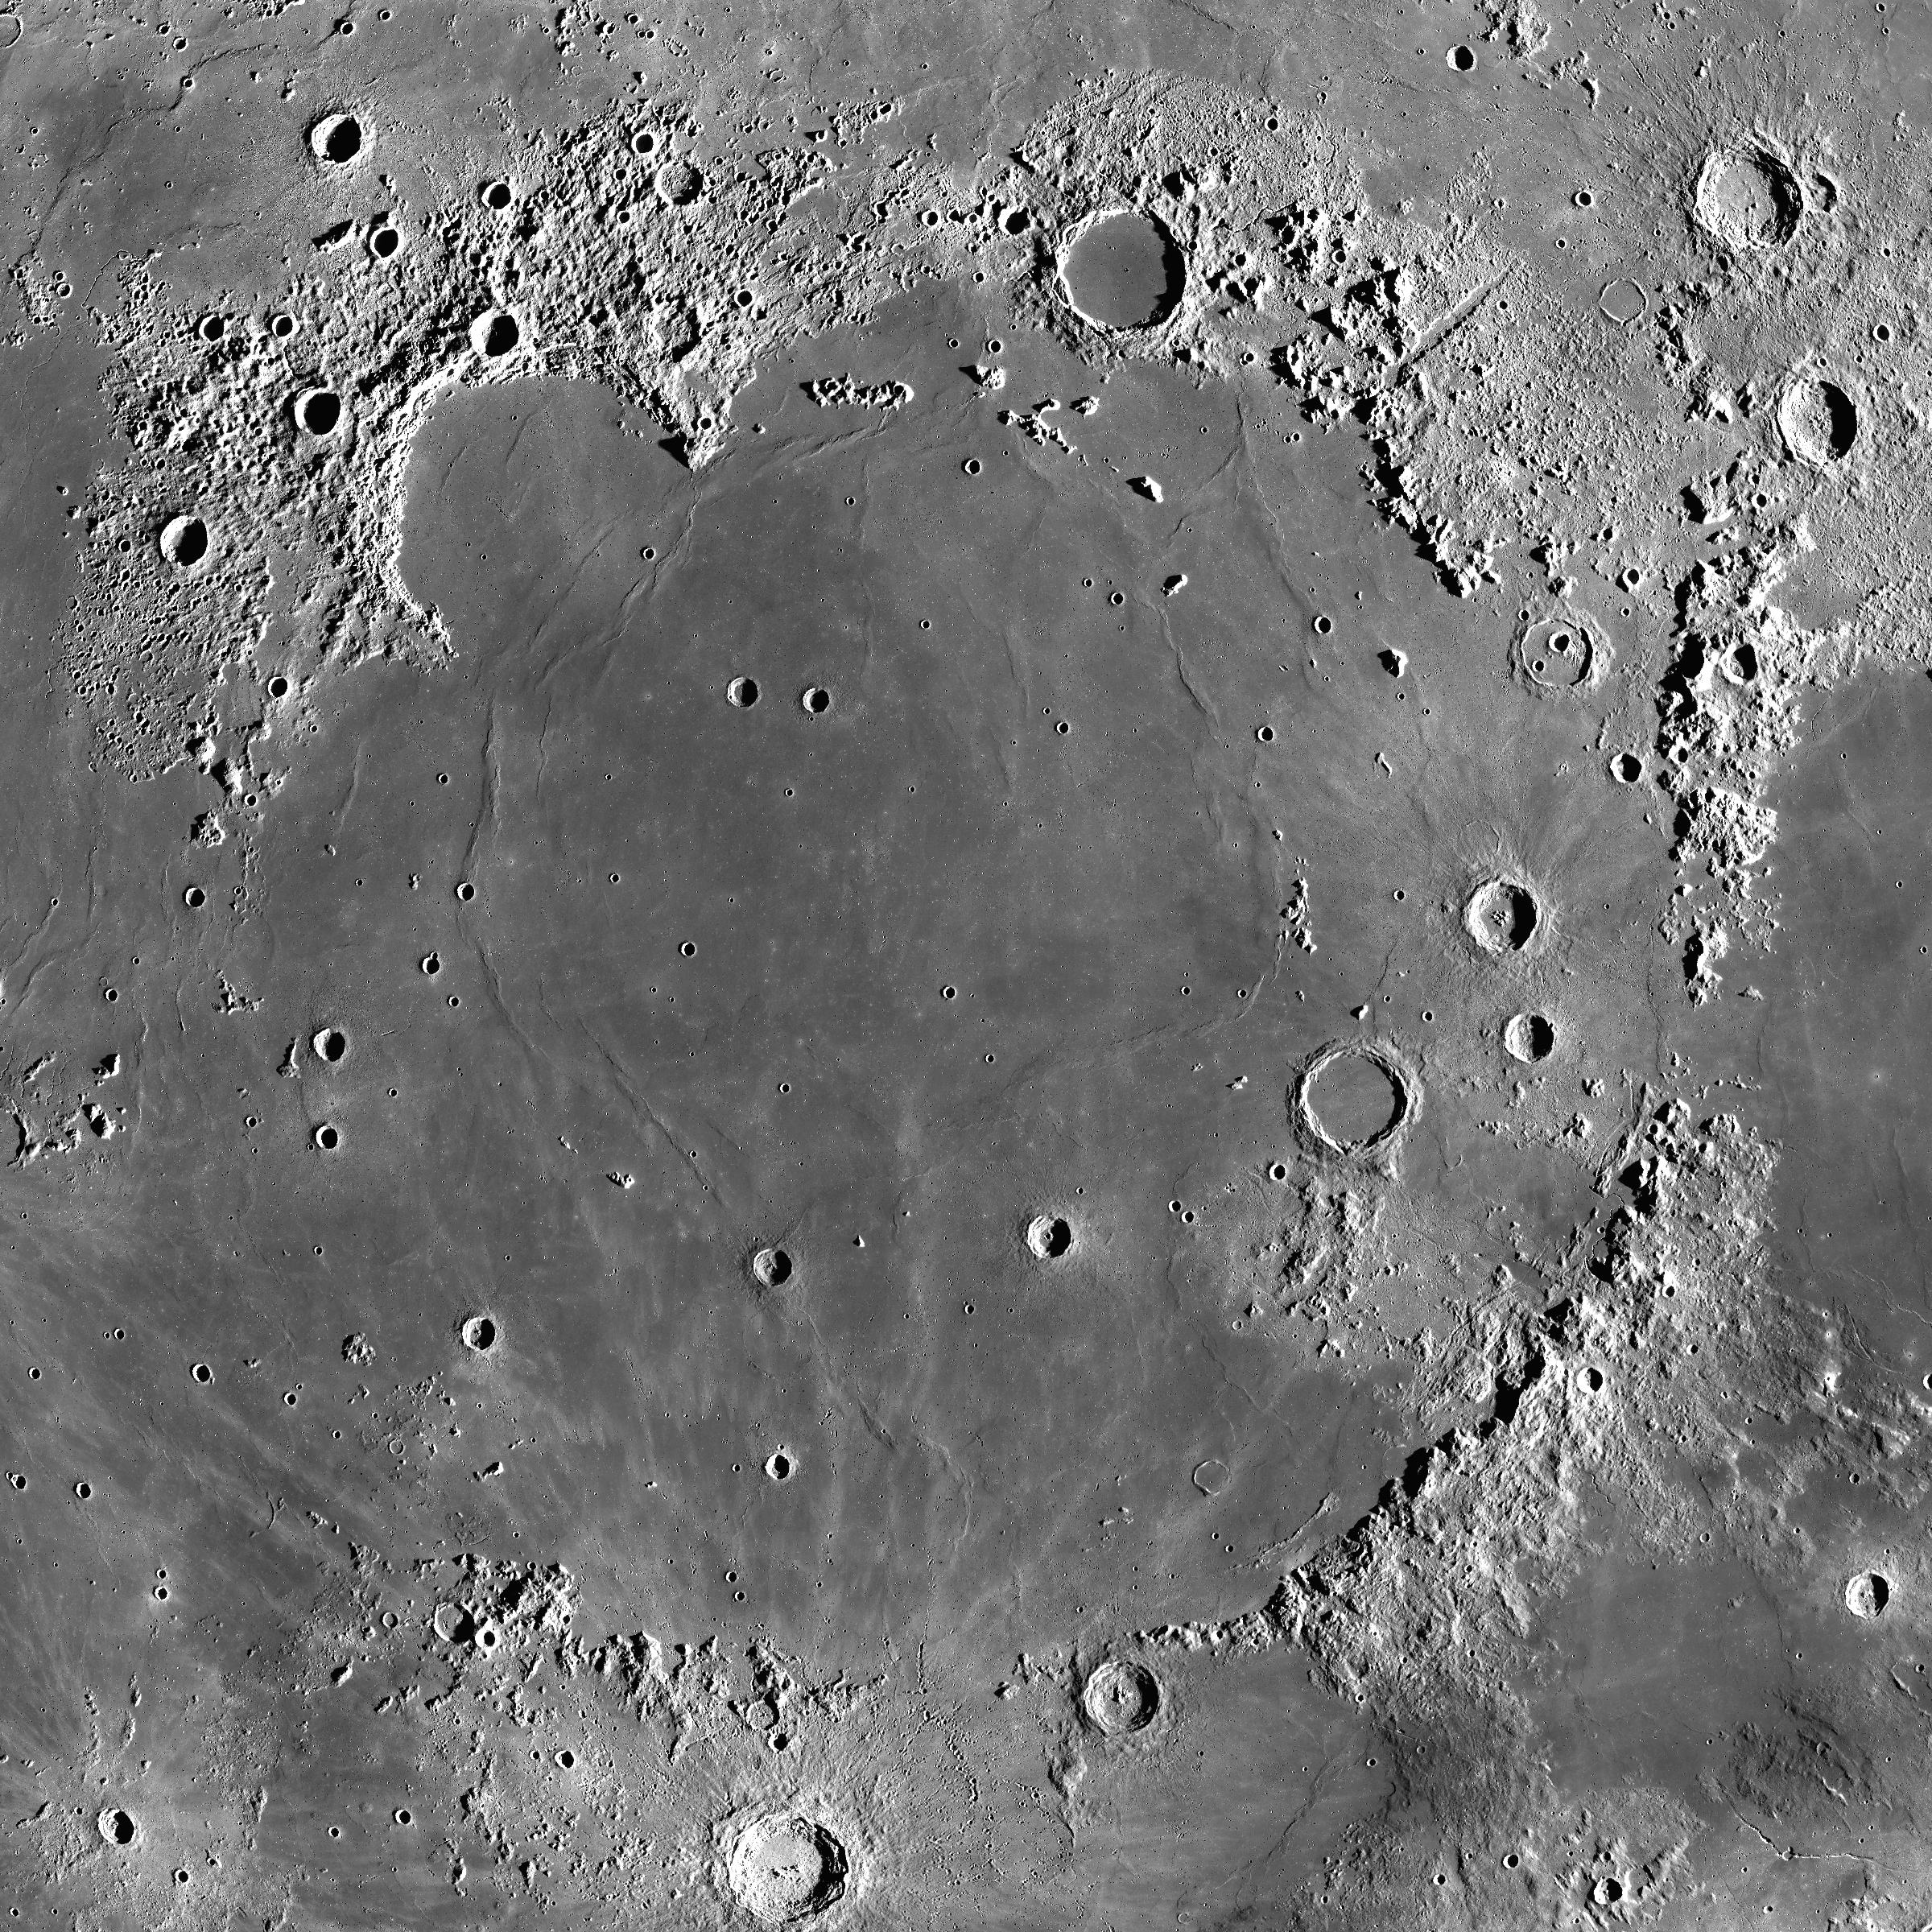 The Lunar Reconnaissance Orbiter captured images of the Imbrium Basin, a huge basin on the moon with a mountain range on its northern ridge.